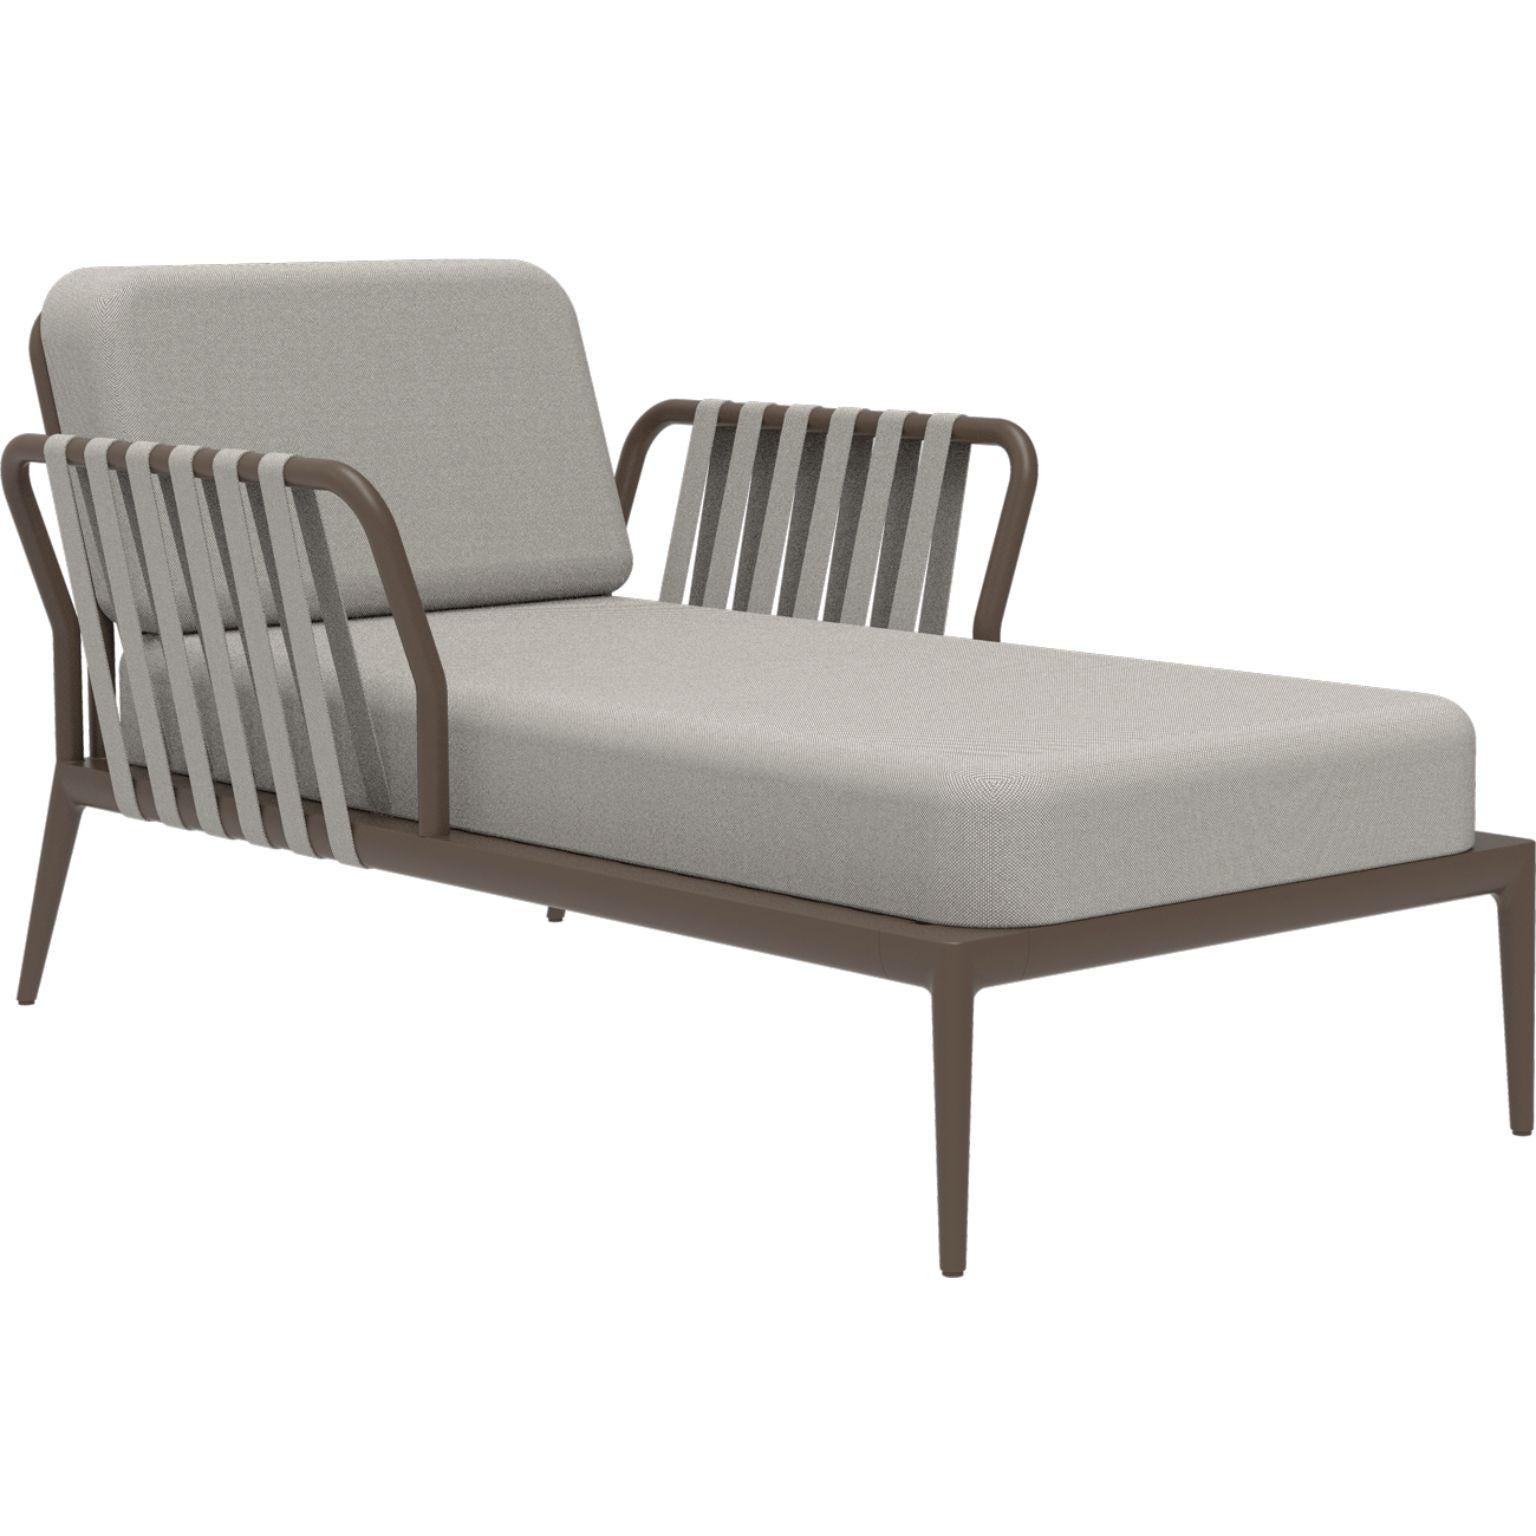 Ribbons Bronze Divan by MOWEE
Dimensions: D91 x W155 x H81 cm (seat height 42cm)
Material: Aluminum and upholstery.
Weight: 30 kg.
Also available in different colors and finishes.

An unmistakable collection for its beauty and robustness. A